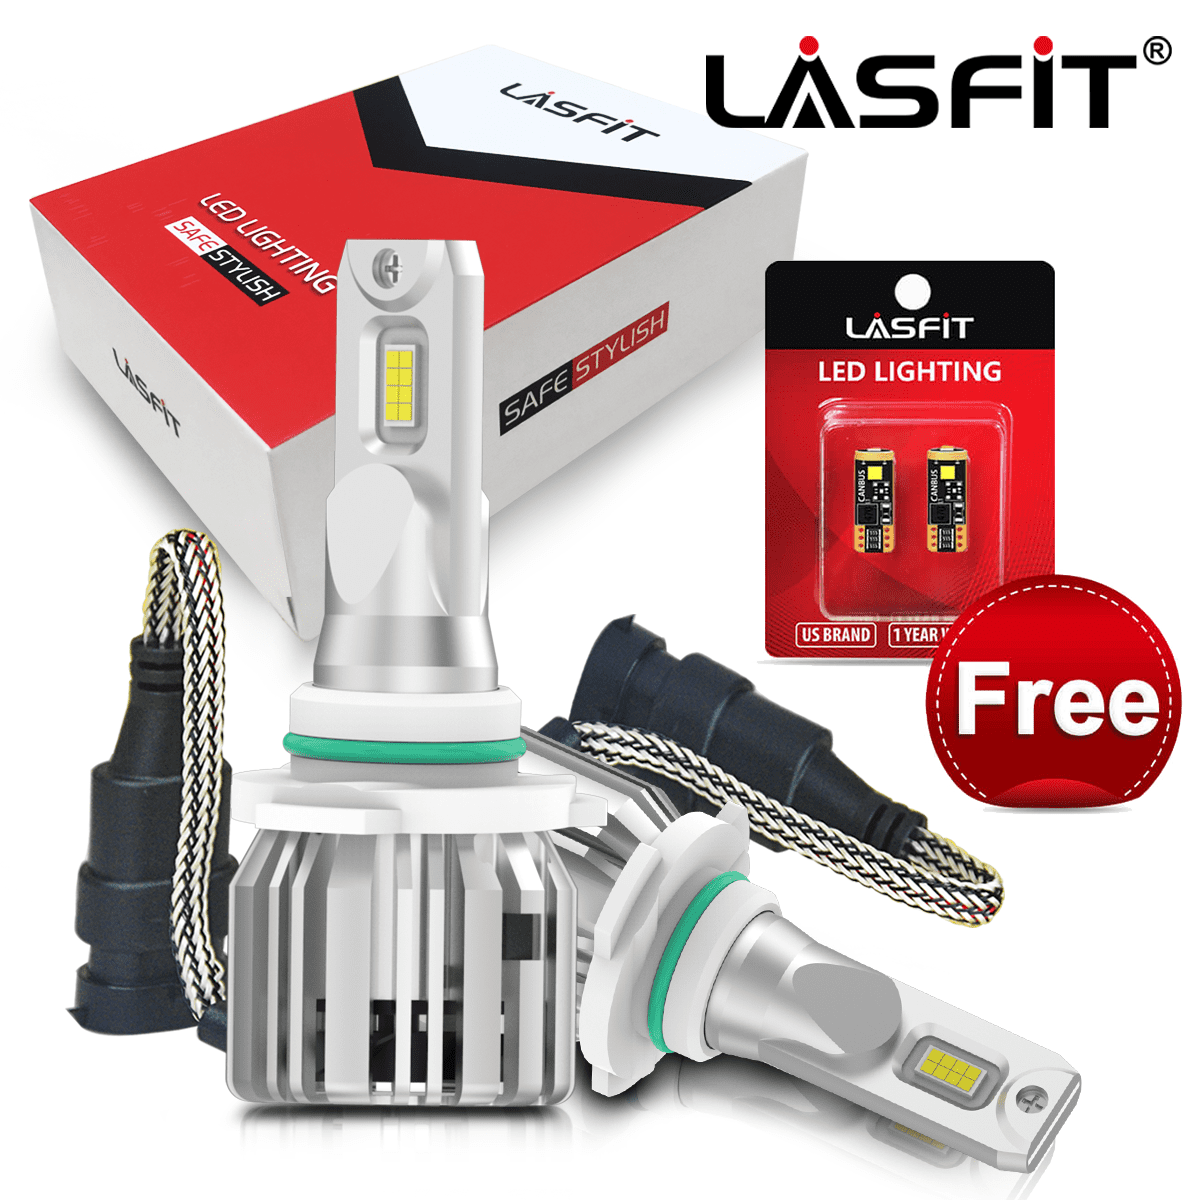 Win Power 9005/HB3 LED Headlight Bulbs All-in-One Conversion Kit-8,000Lm 6000K Cool White CSP High Beam Bulb-2 Yr Warranty 4333022189 